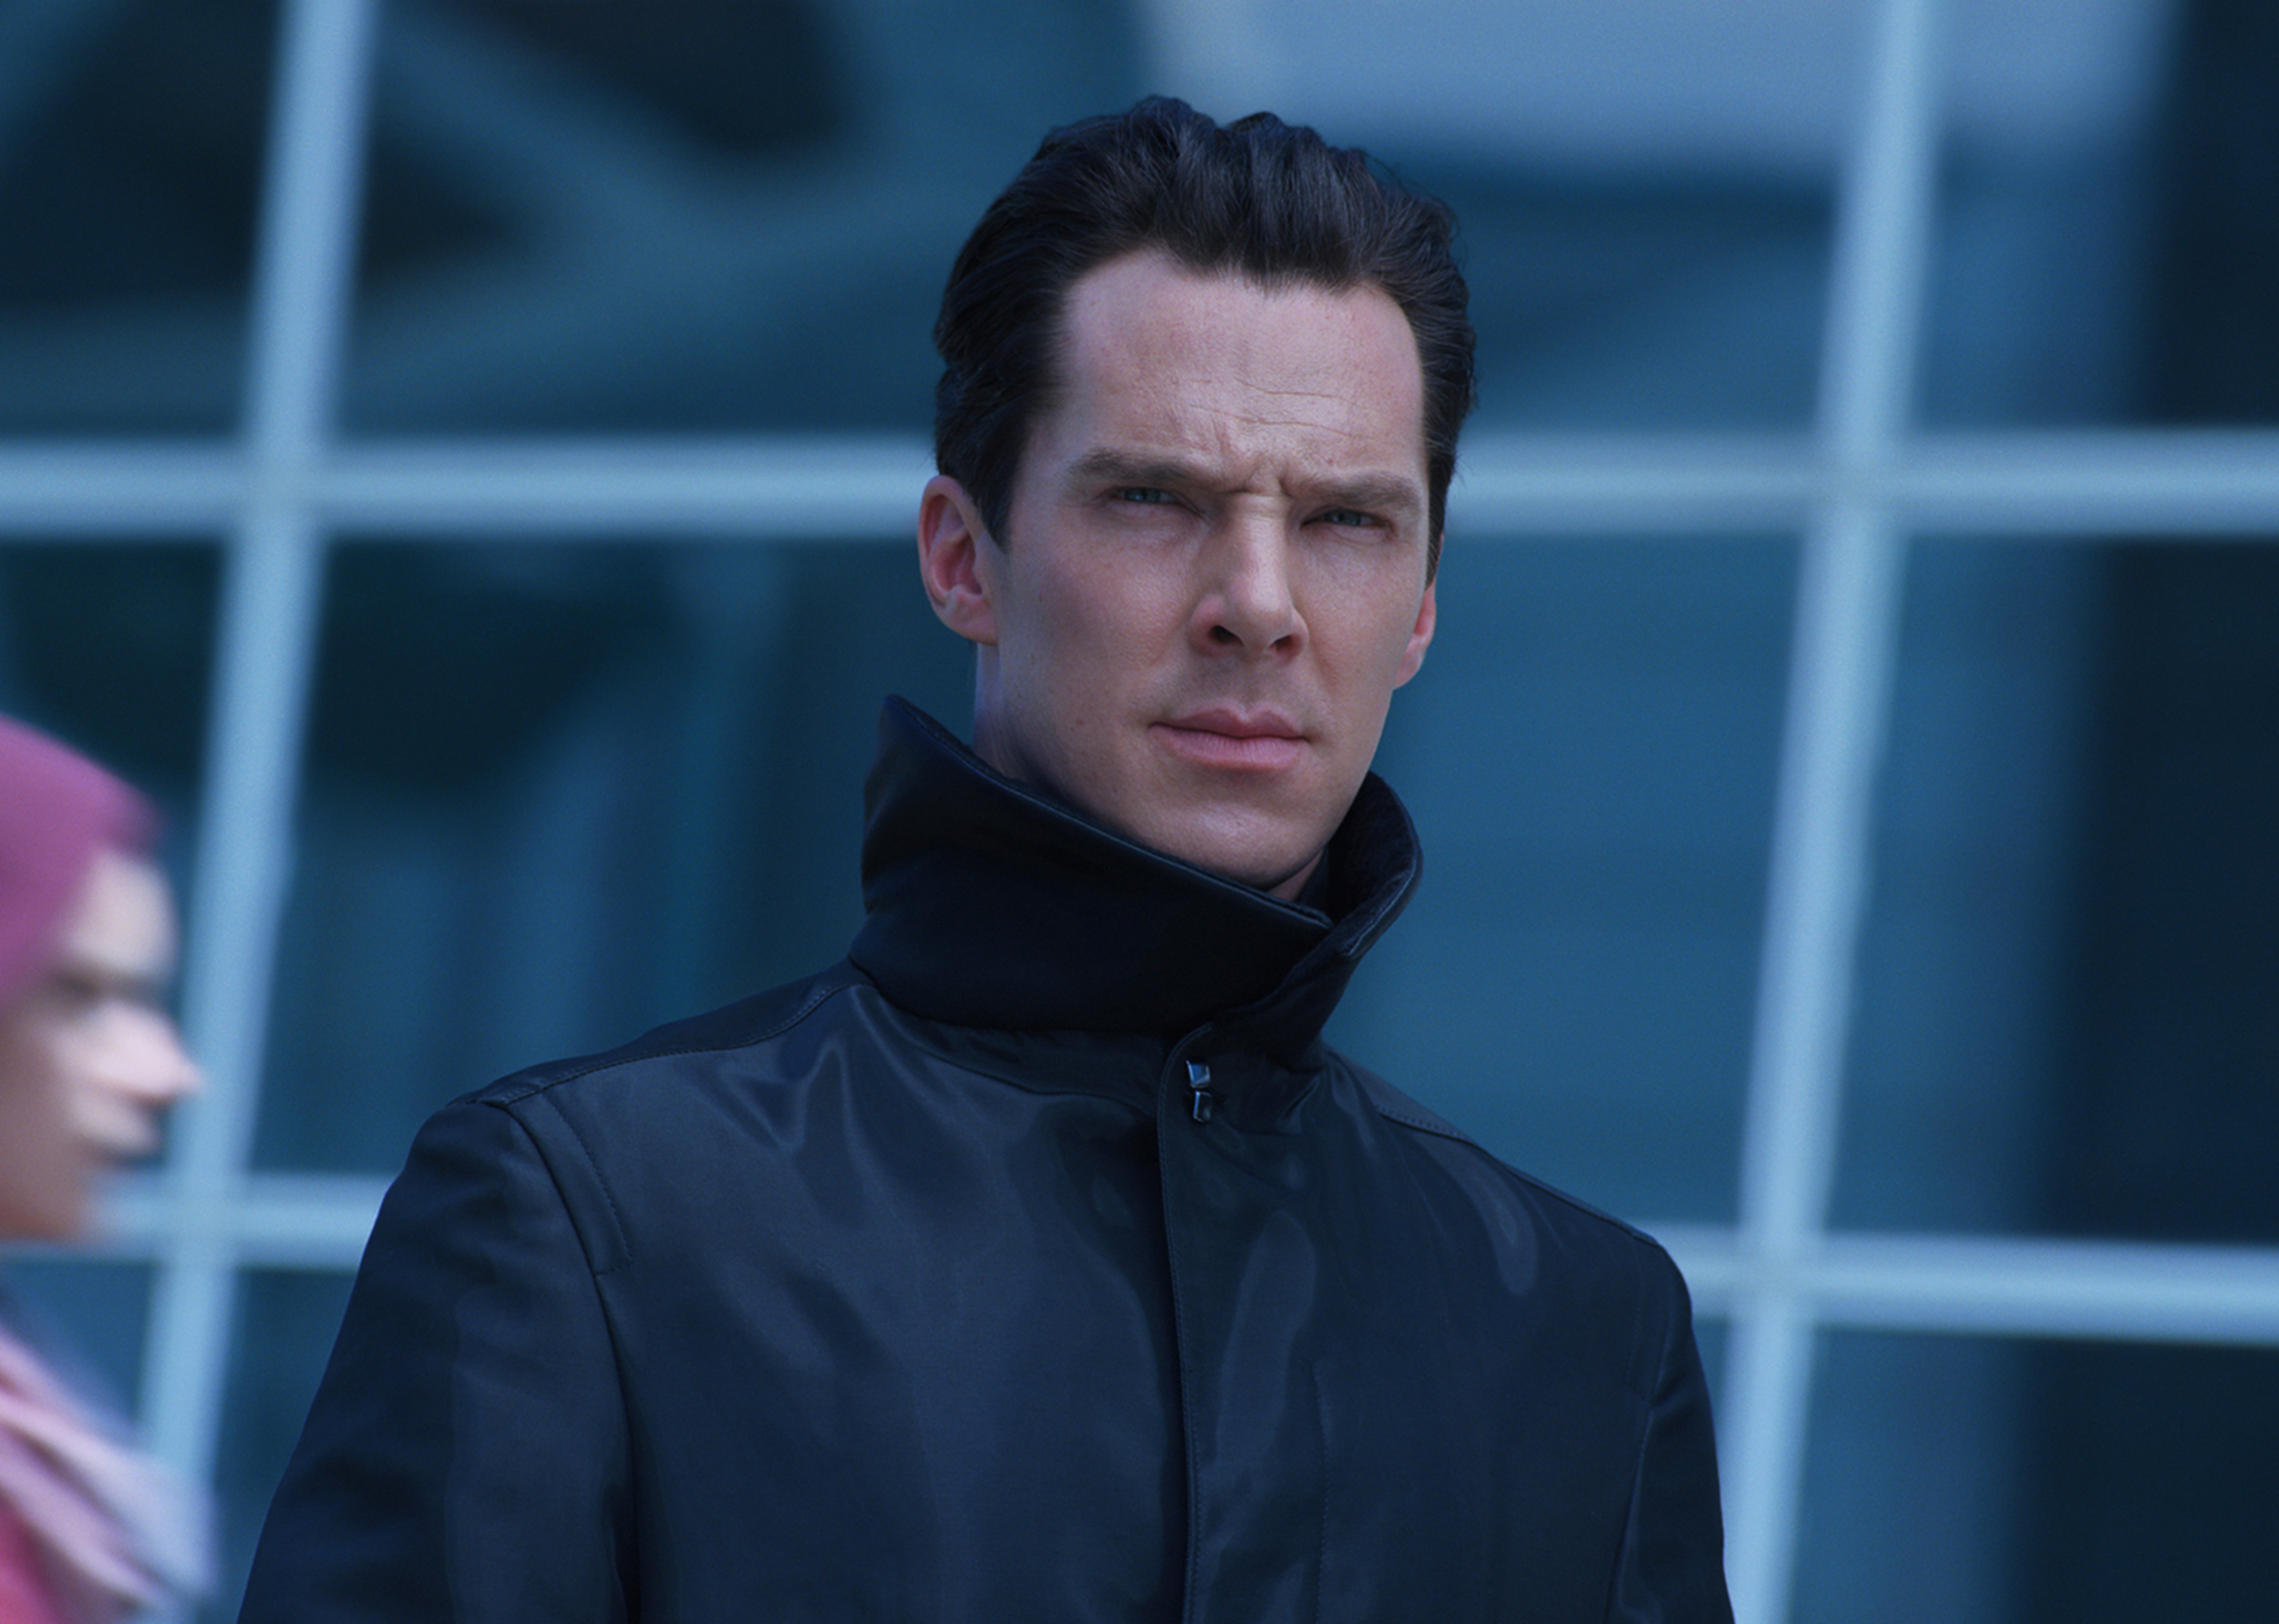 <p>In 2013, <em>Star Trek Into Darkness </em>was released. While there was a weird attempt to keep people from knowing Benedict Cumberbatch was playing Khan, the movie still made $467.4 million worldwide. Then, in 2016, <em>Star Trek Beyond</em> was dropped. Justin Lin replaced Abrams as director, but the movie dropped to a box office of $343.5 million from a budget of $185 million.</p><p>You may also like: <a href='https://www.yardbarker.com/entertainment/articles/taylor_swifts_22_most_essential_songs_ranked_030524/s1__38641430'>Taylor Swift's 22 most essential songs, ranked</a></p>